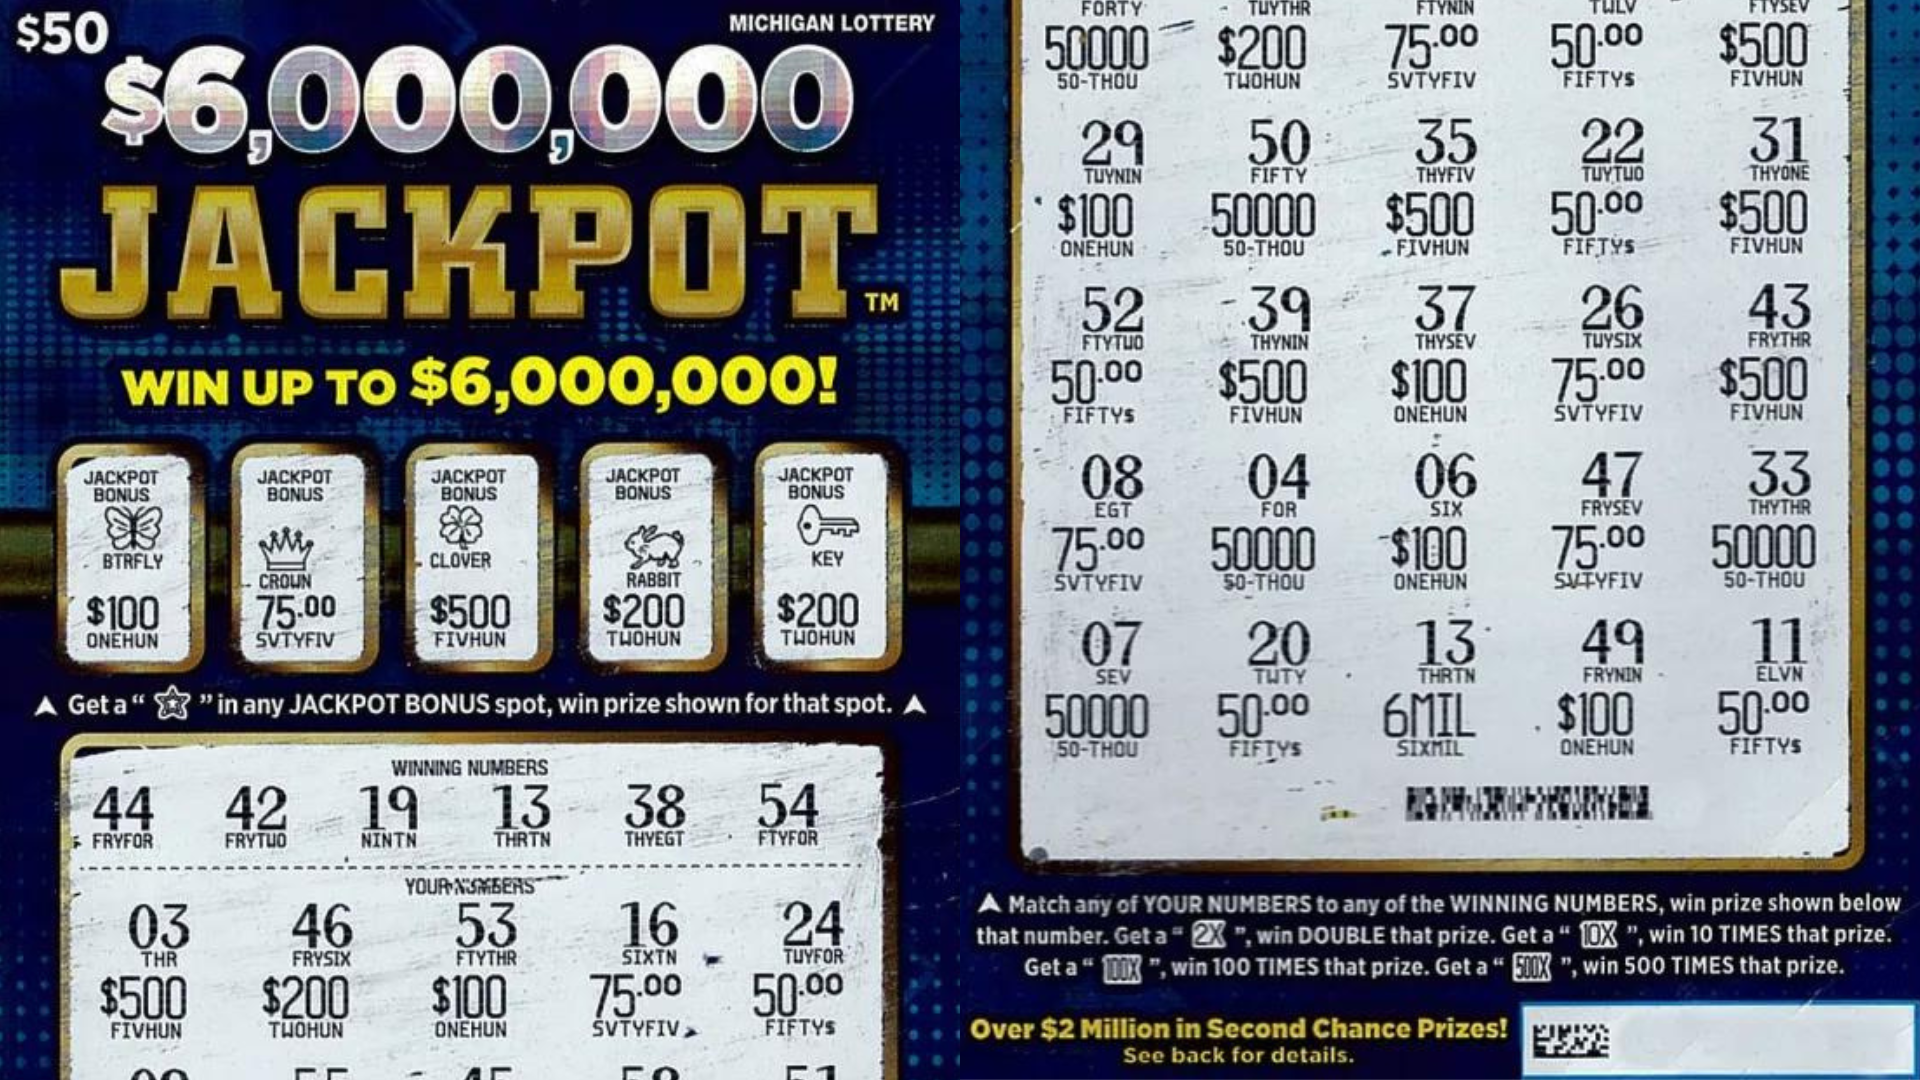 Alpena County woman uses $30 lottery prize to buy scratch-off ticket, wins  $6M